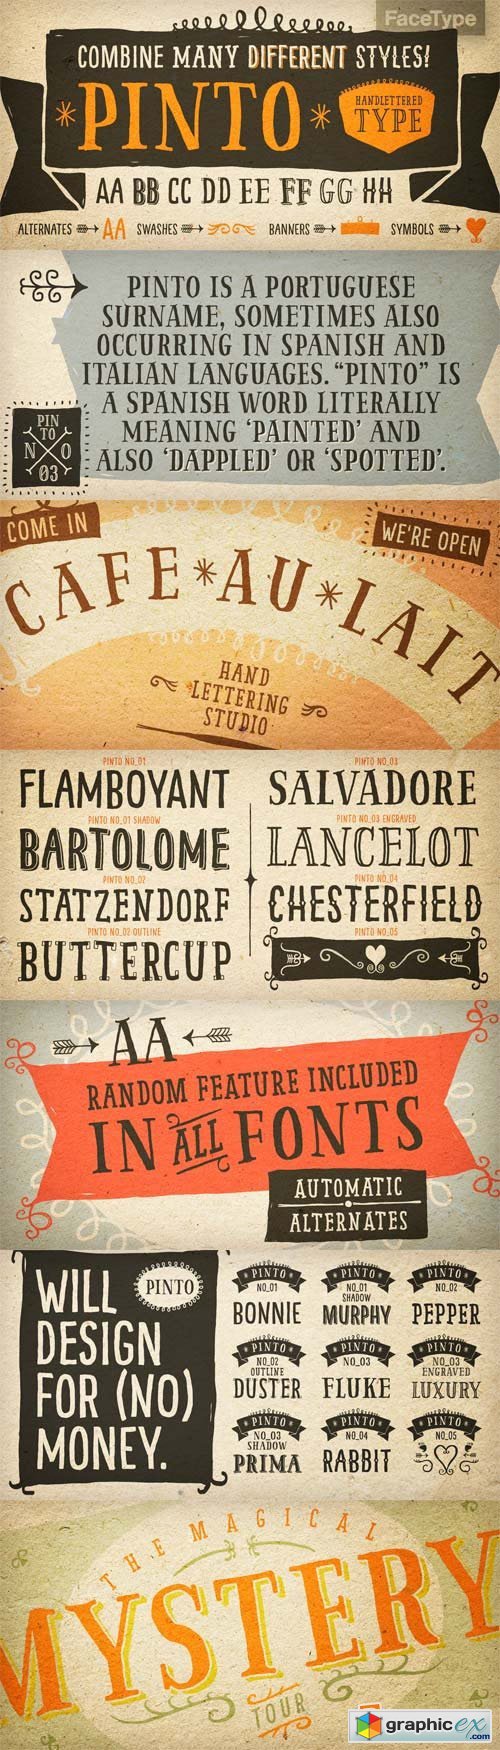 Pinto Font Family - 14 Fonts for $29